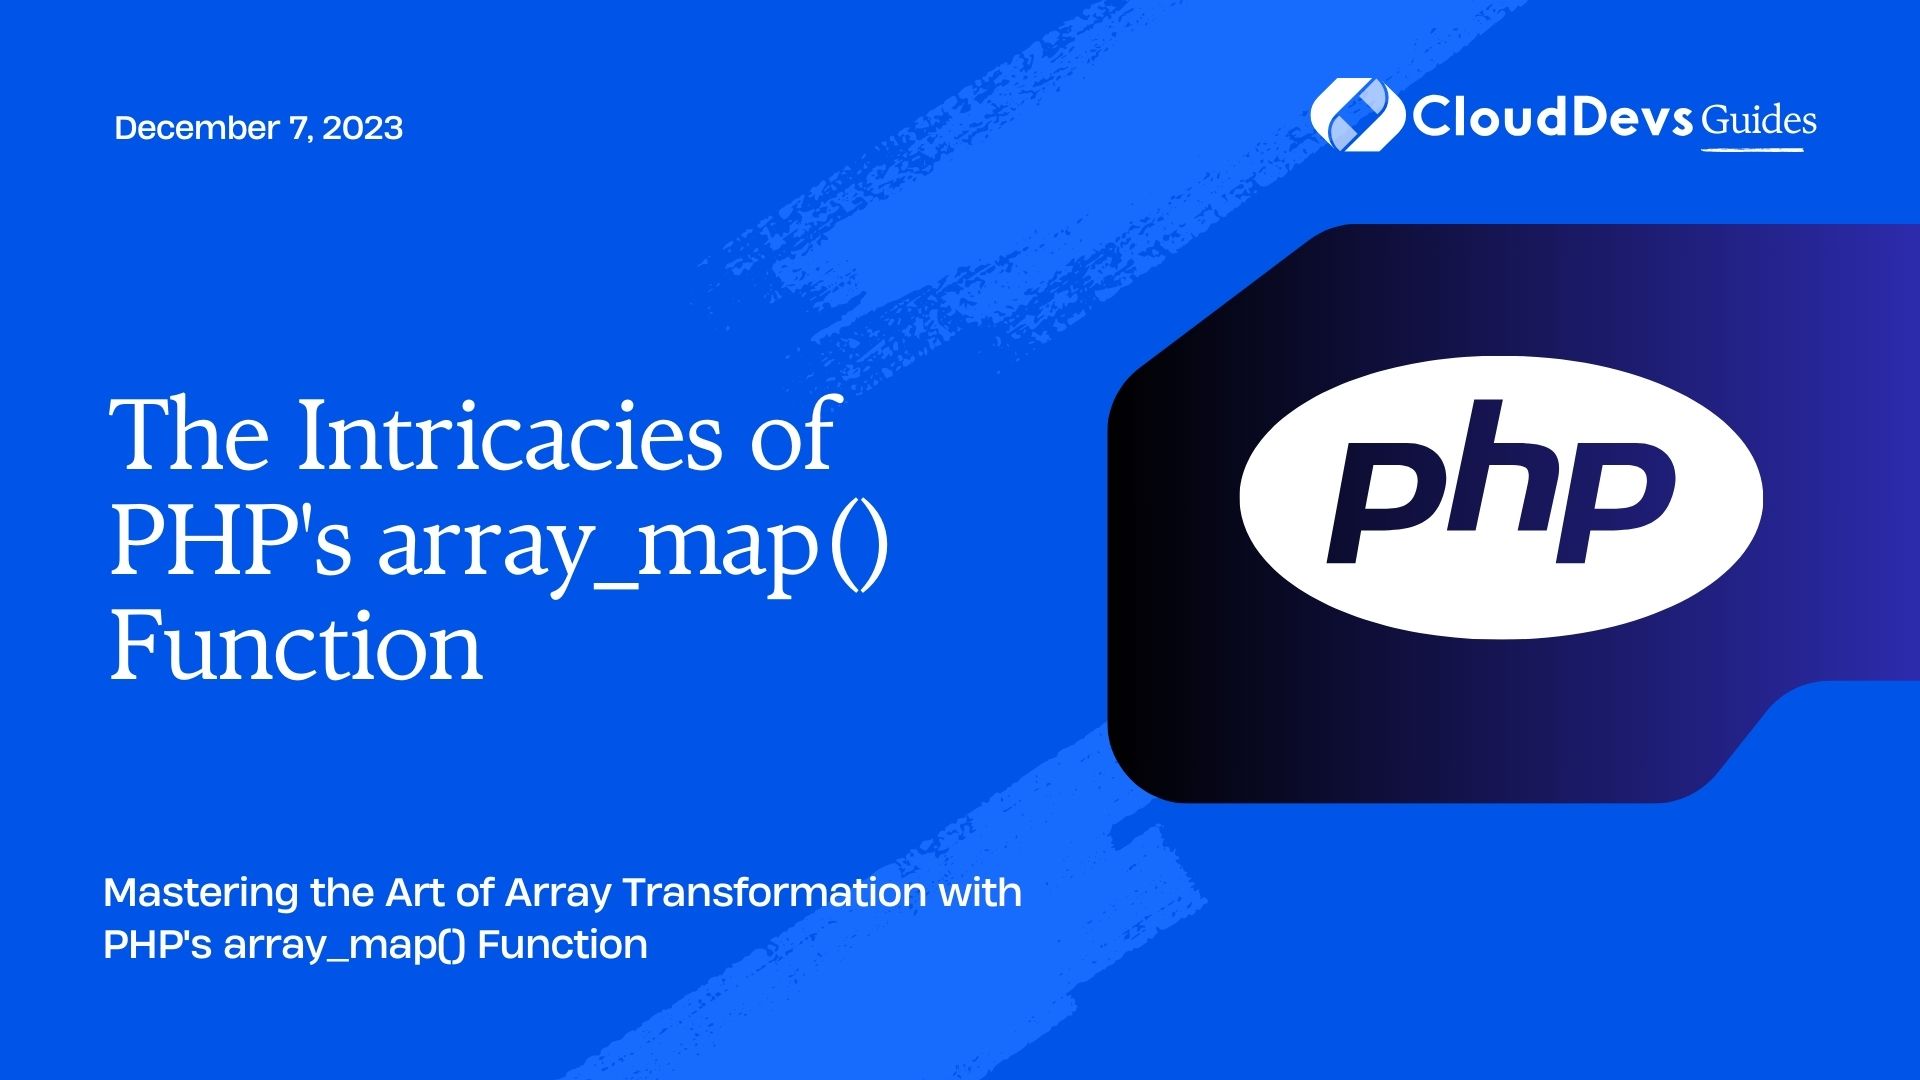 The Intricacies of PHP's array_map() Function